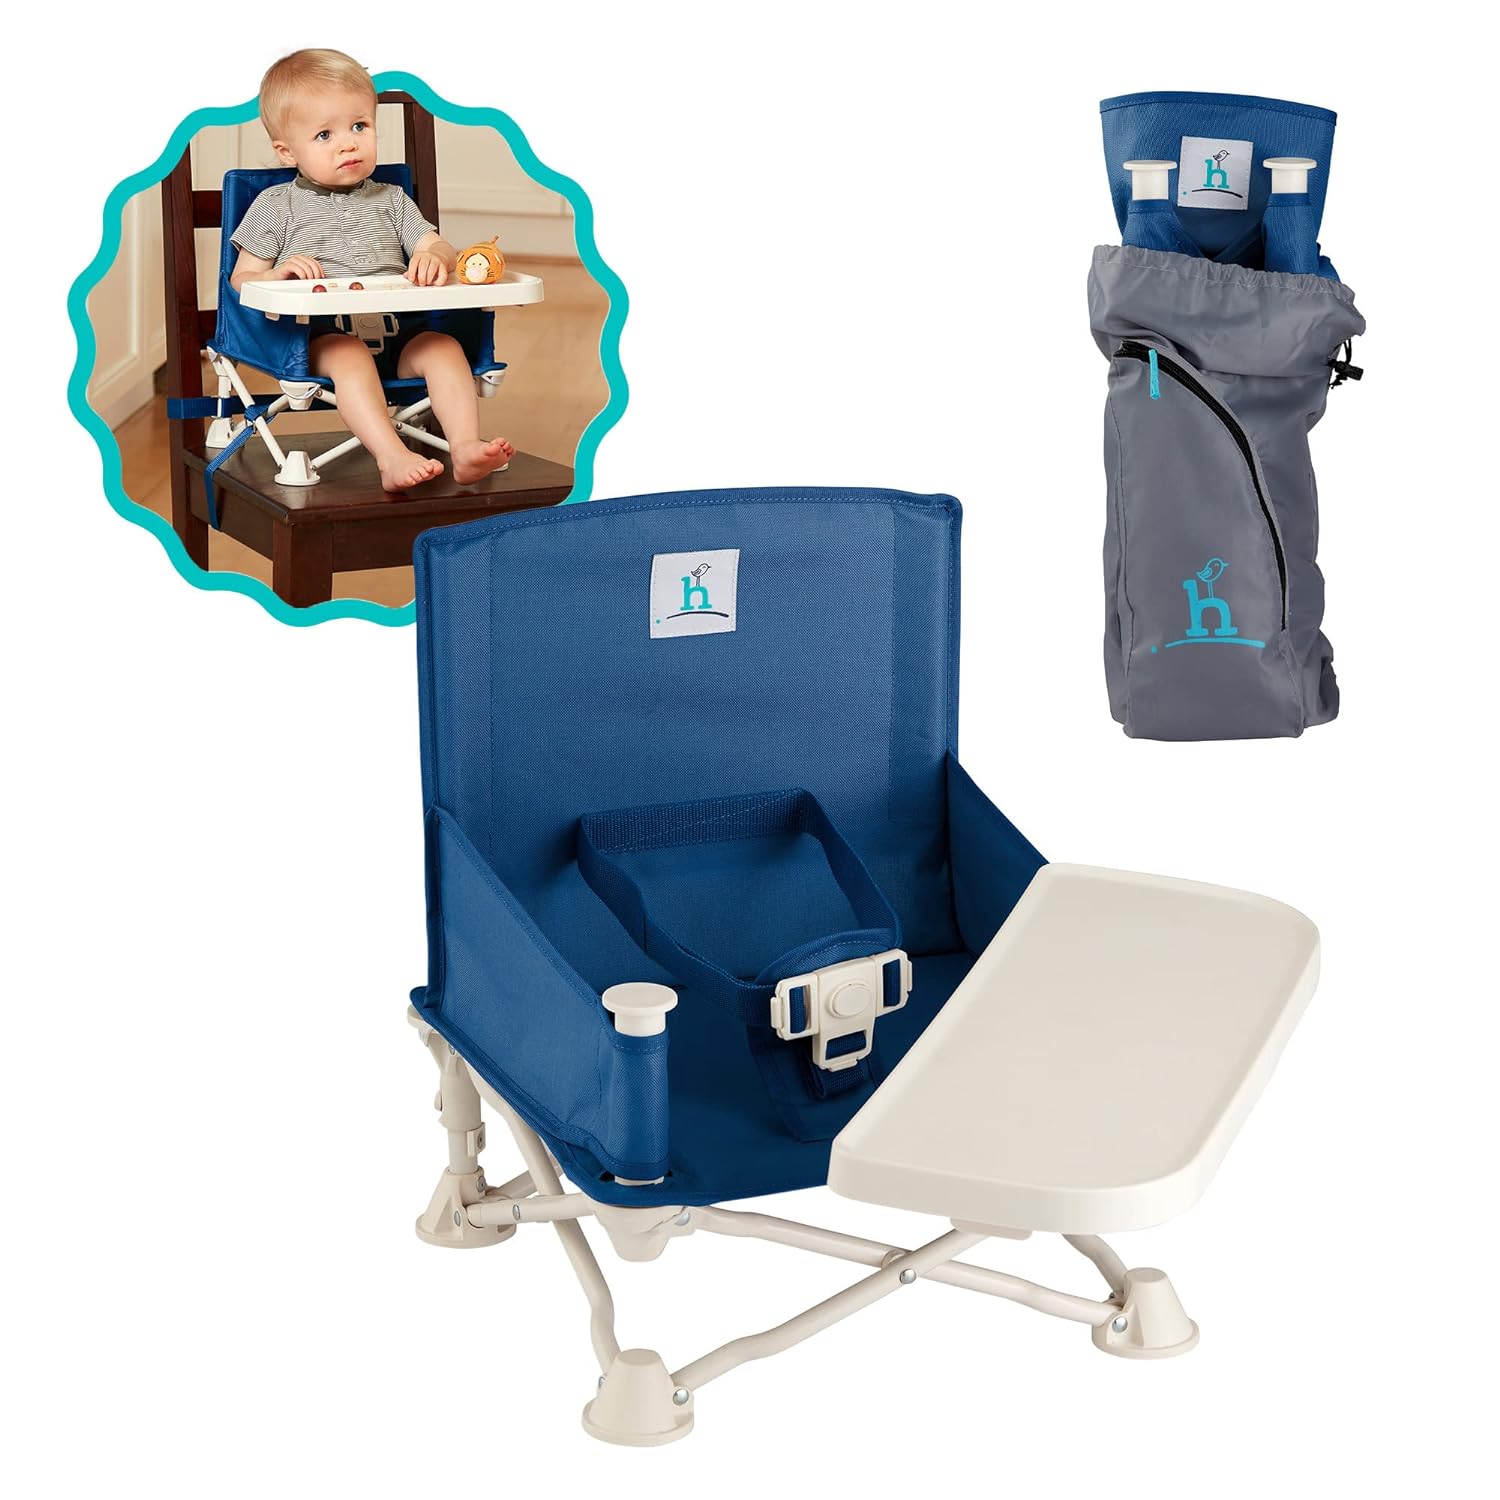 high chair for traveling beach chair as well